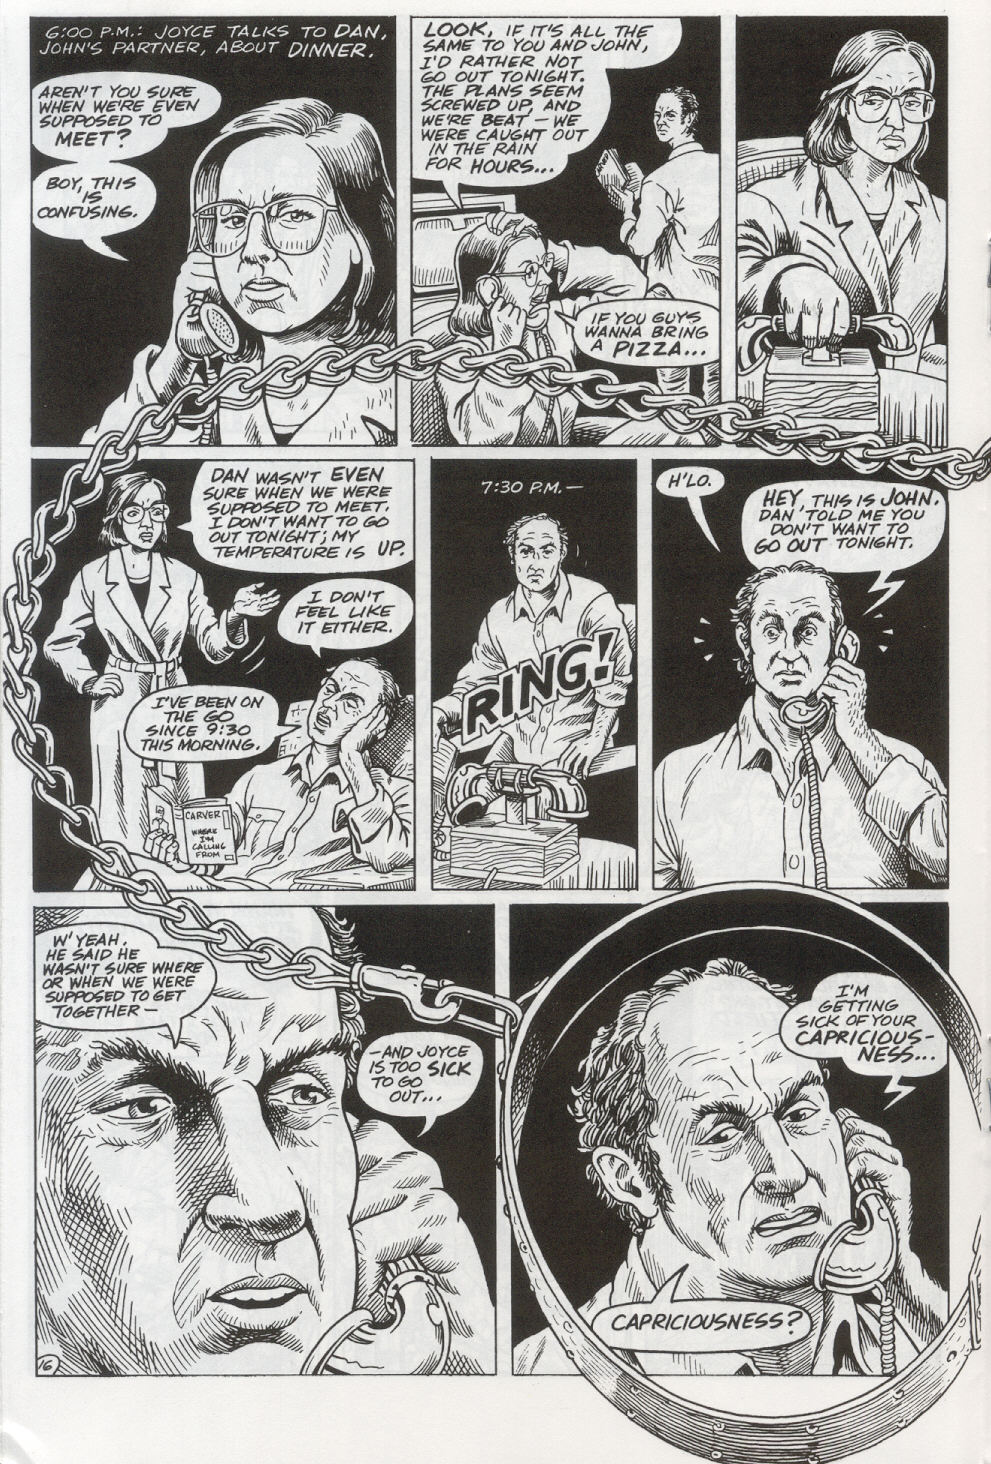 American Splendor Special: A Step Out of the Nest issue Full - Page 19